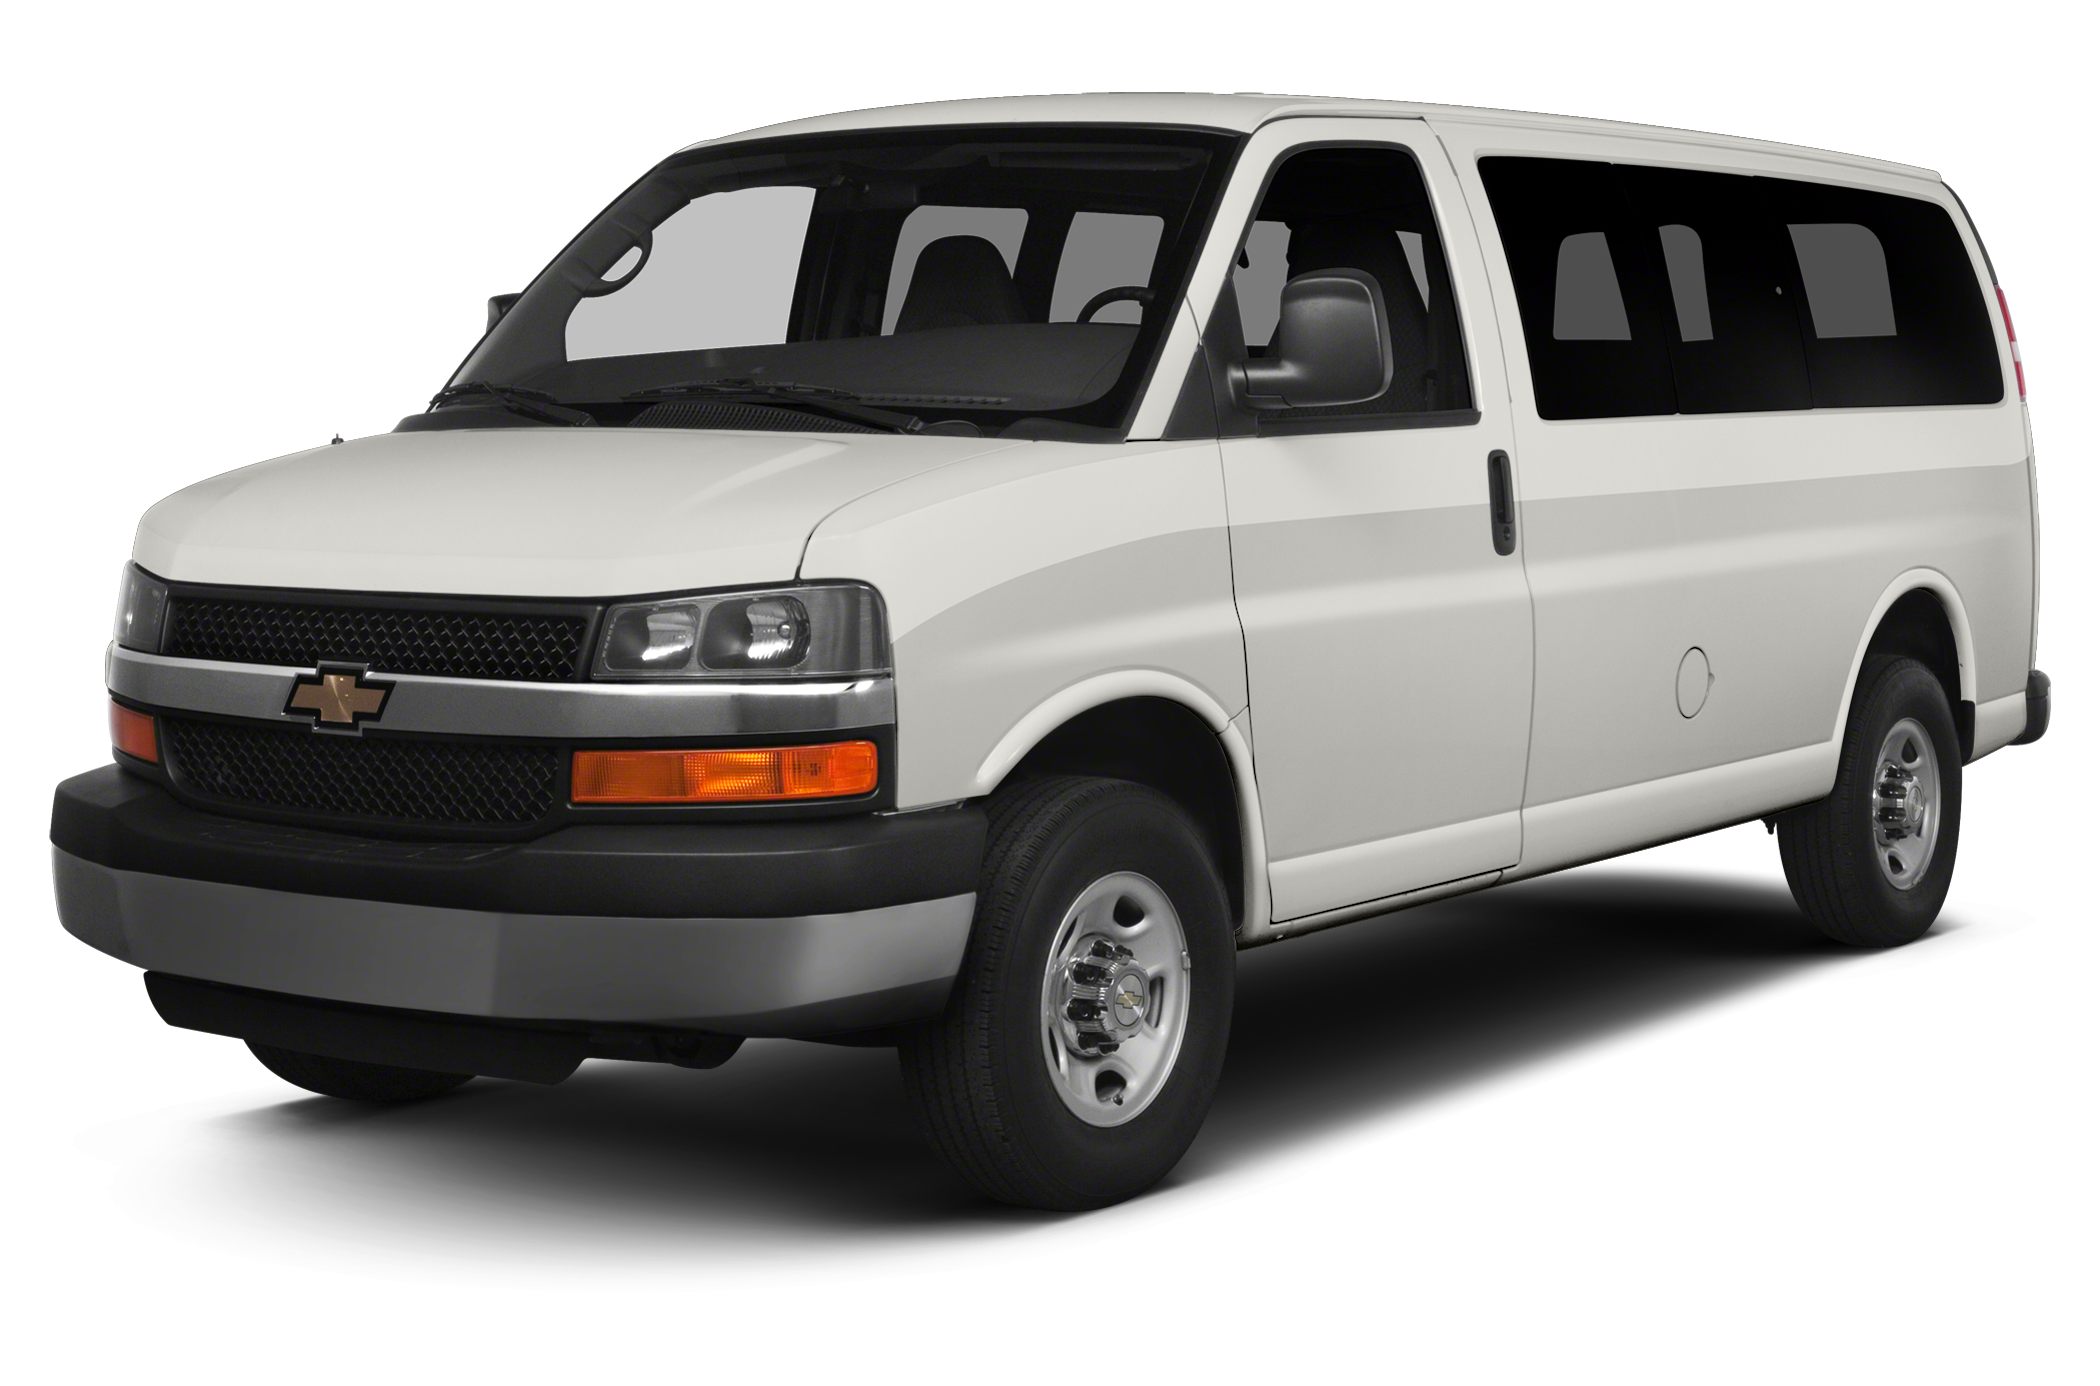 2013 Chevrolet Express 3500 Specs and 